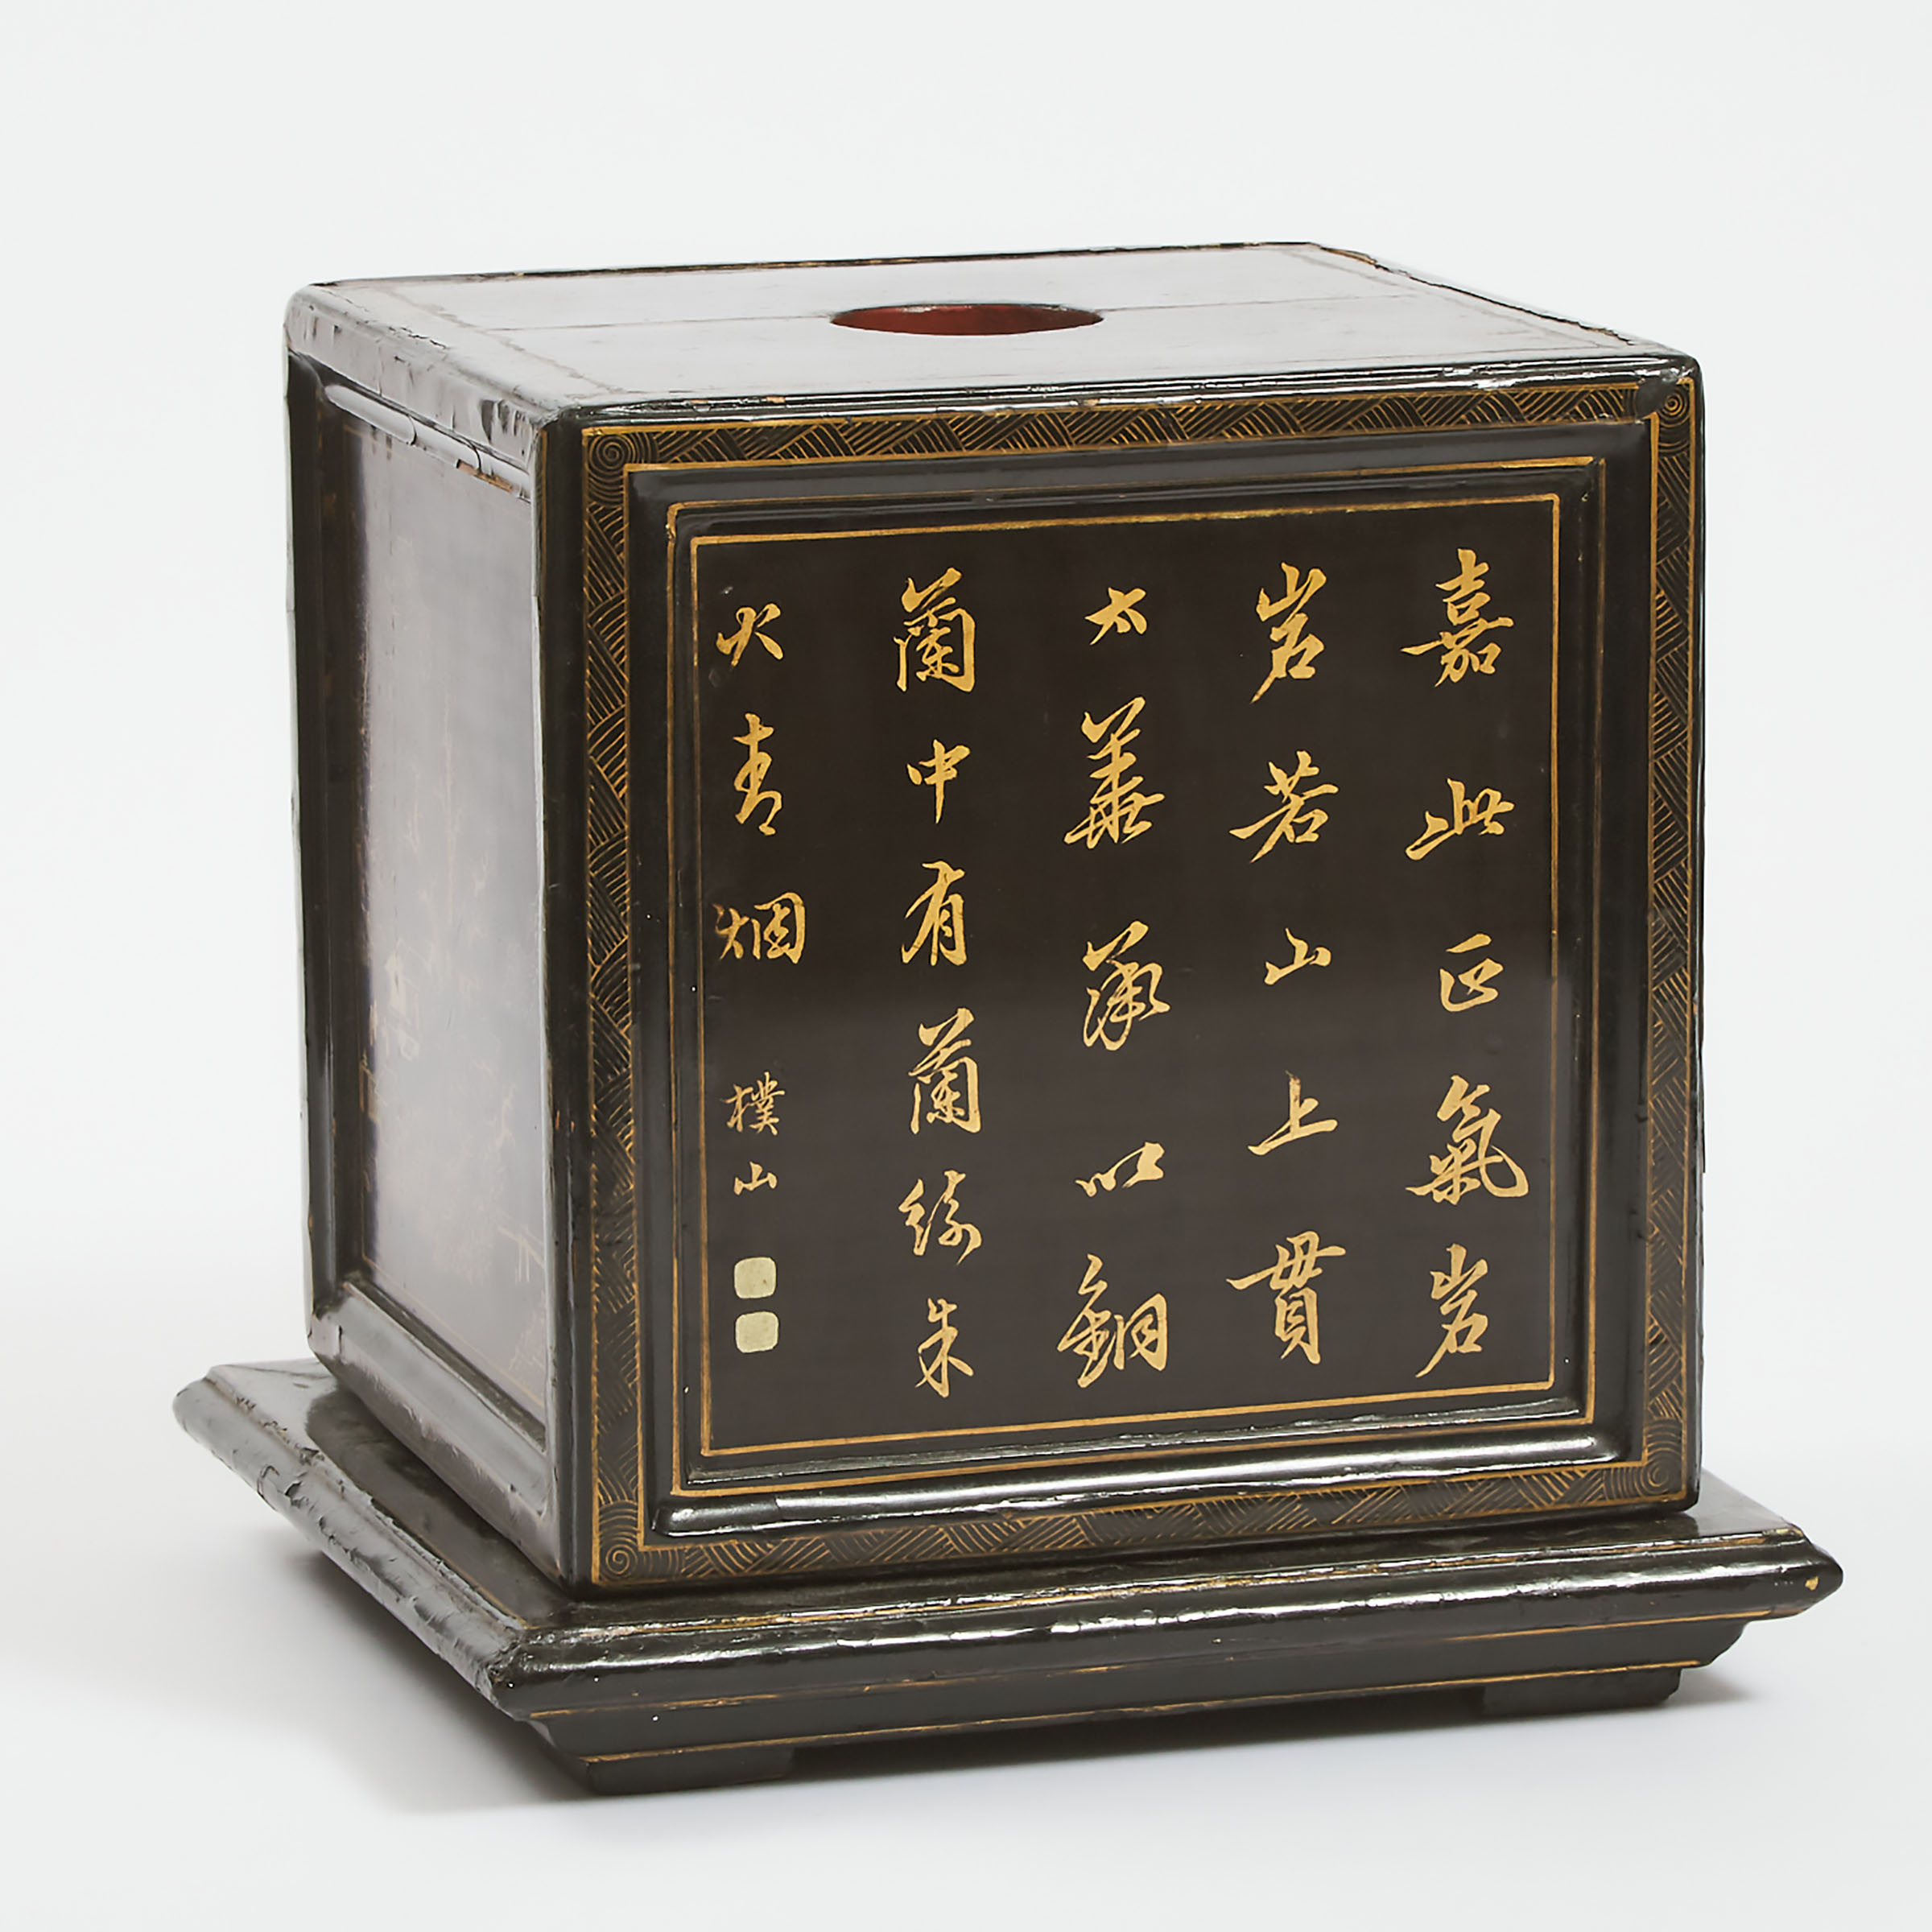 A Black Lacquer Seal/Reliquary Box With